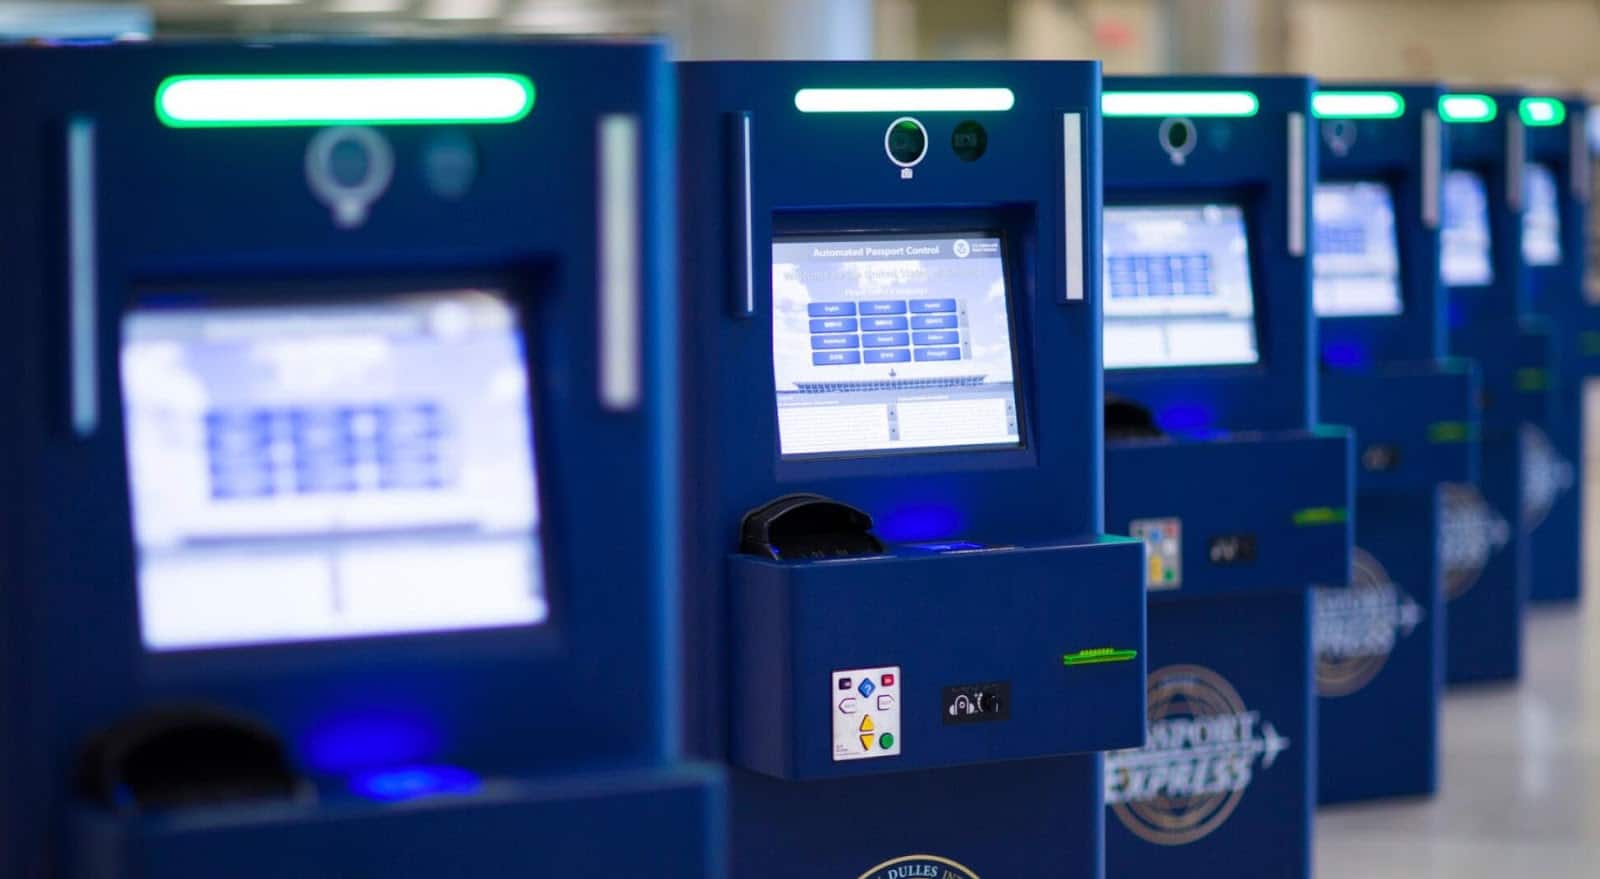 Automated passport control kiosks at airport allow for quick international entry through customs